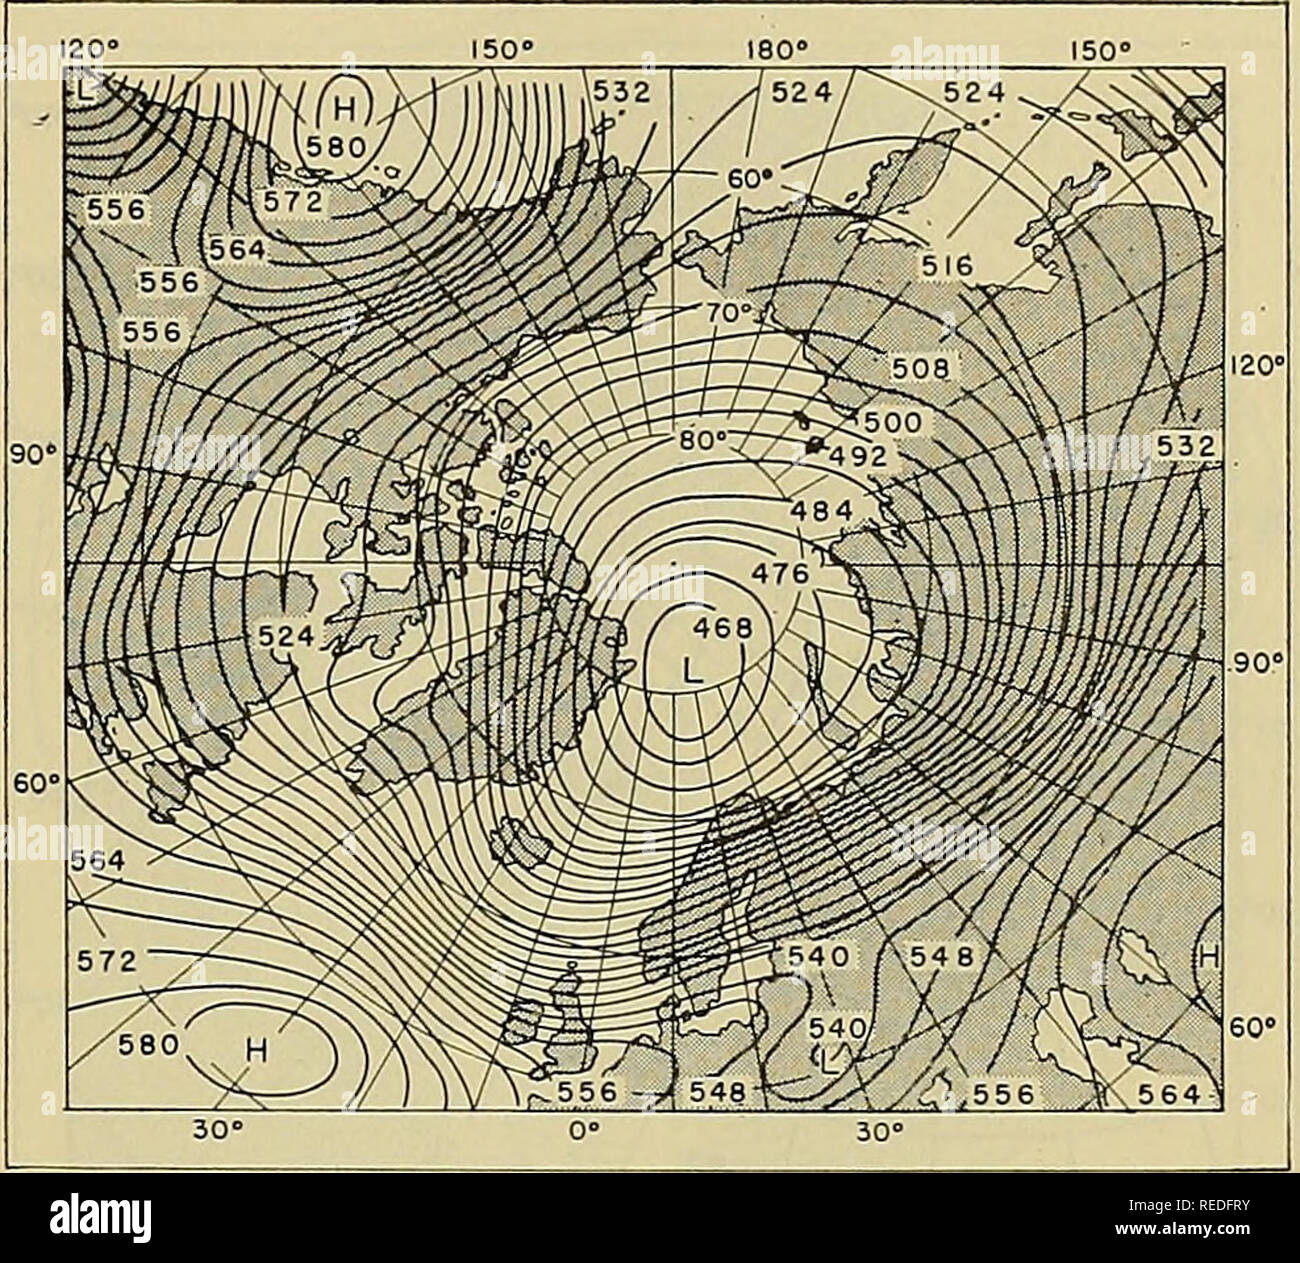 . Compendium of meteorology. Meteorology. EXTENDED-RANGE WEATHER FORECASTING 823 tour charts show that a remarkable meridional circula- tion extends also to the upper troposphere of the middle latitudes. Even at the 5- and 10-km levels, there is, Table IV. Daily Values op the Mean Zonal Gradient along the 60°n latitude circle during the first Six Months of 1949* (In mb per 1000 km) such a case is the high-pressure cell at the 5-km level that within five days (November 24-29, 1949) moved from 70°N and 172°W to 78°N and 55°W along an Day January February March April May June 1 12.1 13.7 13.1 7.0 Stock Photo